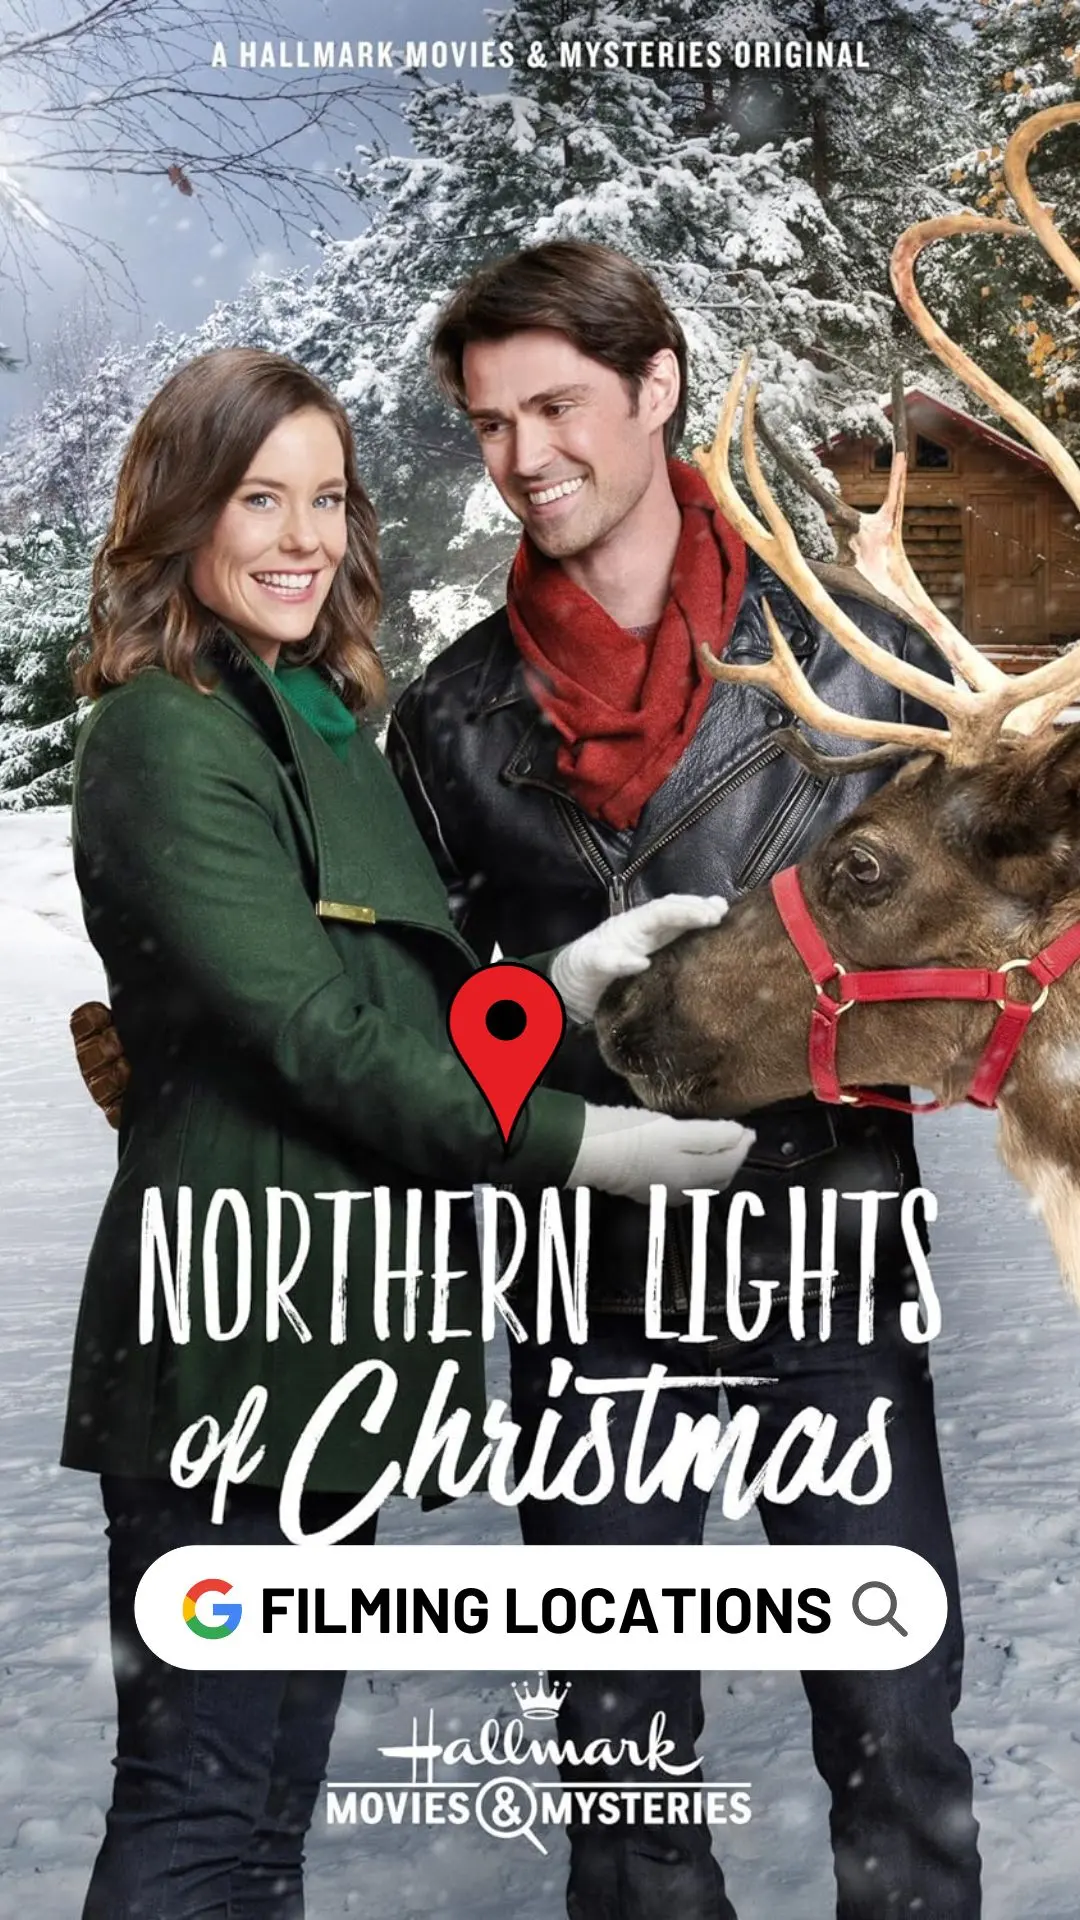 Northern Lights of Christmas Filming Locations